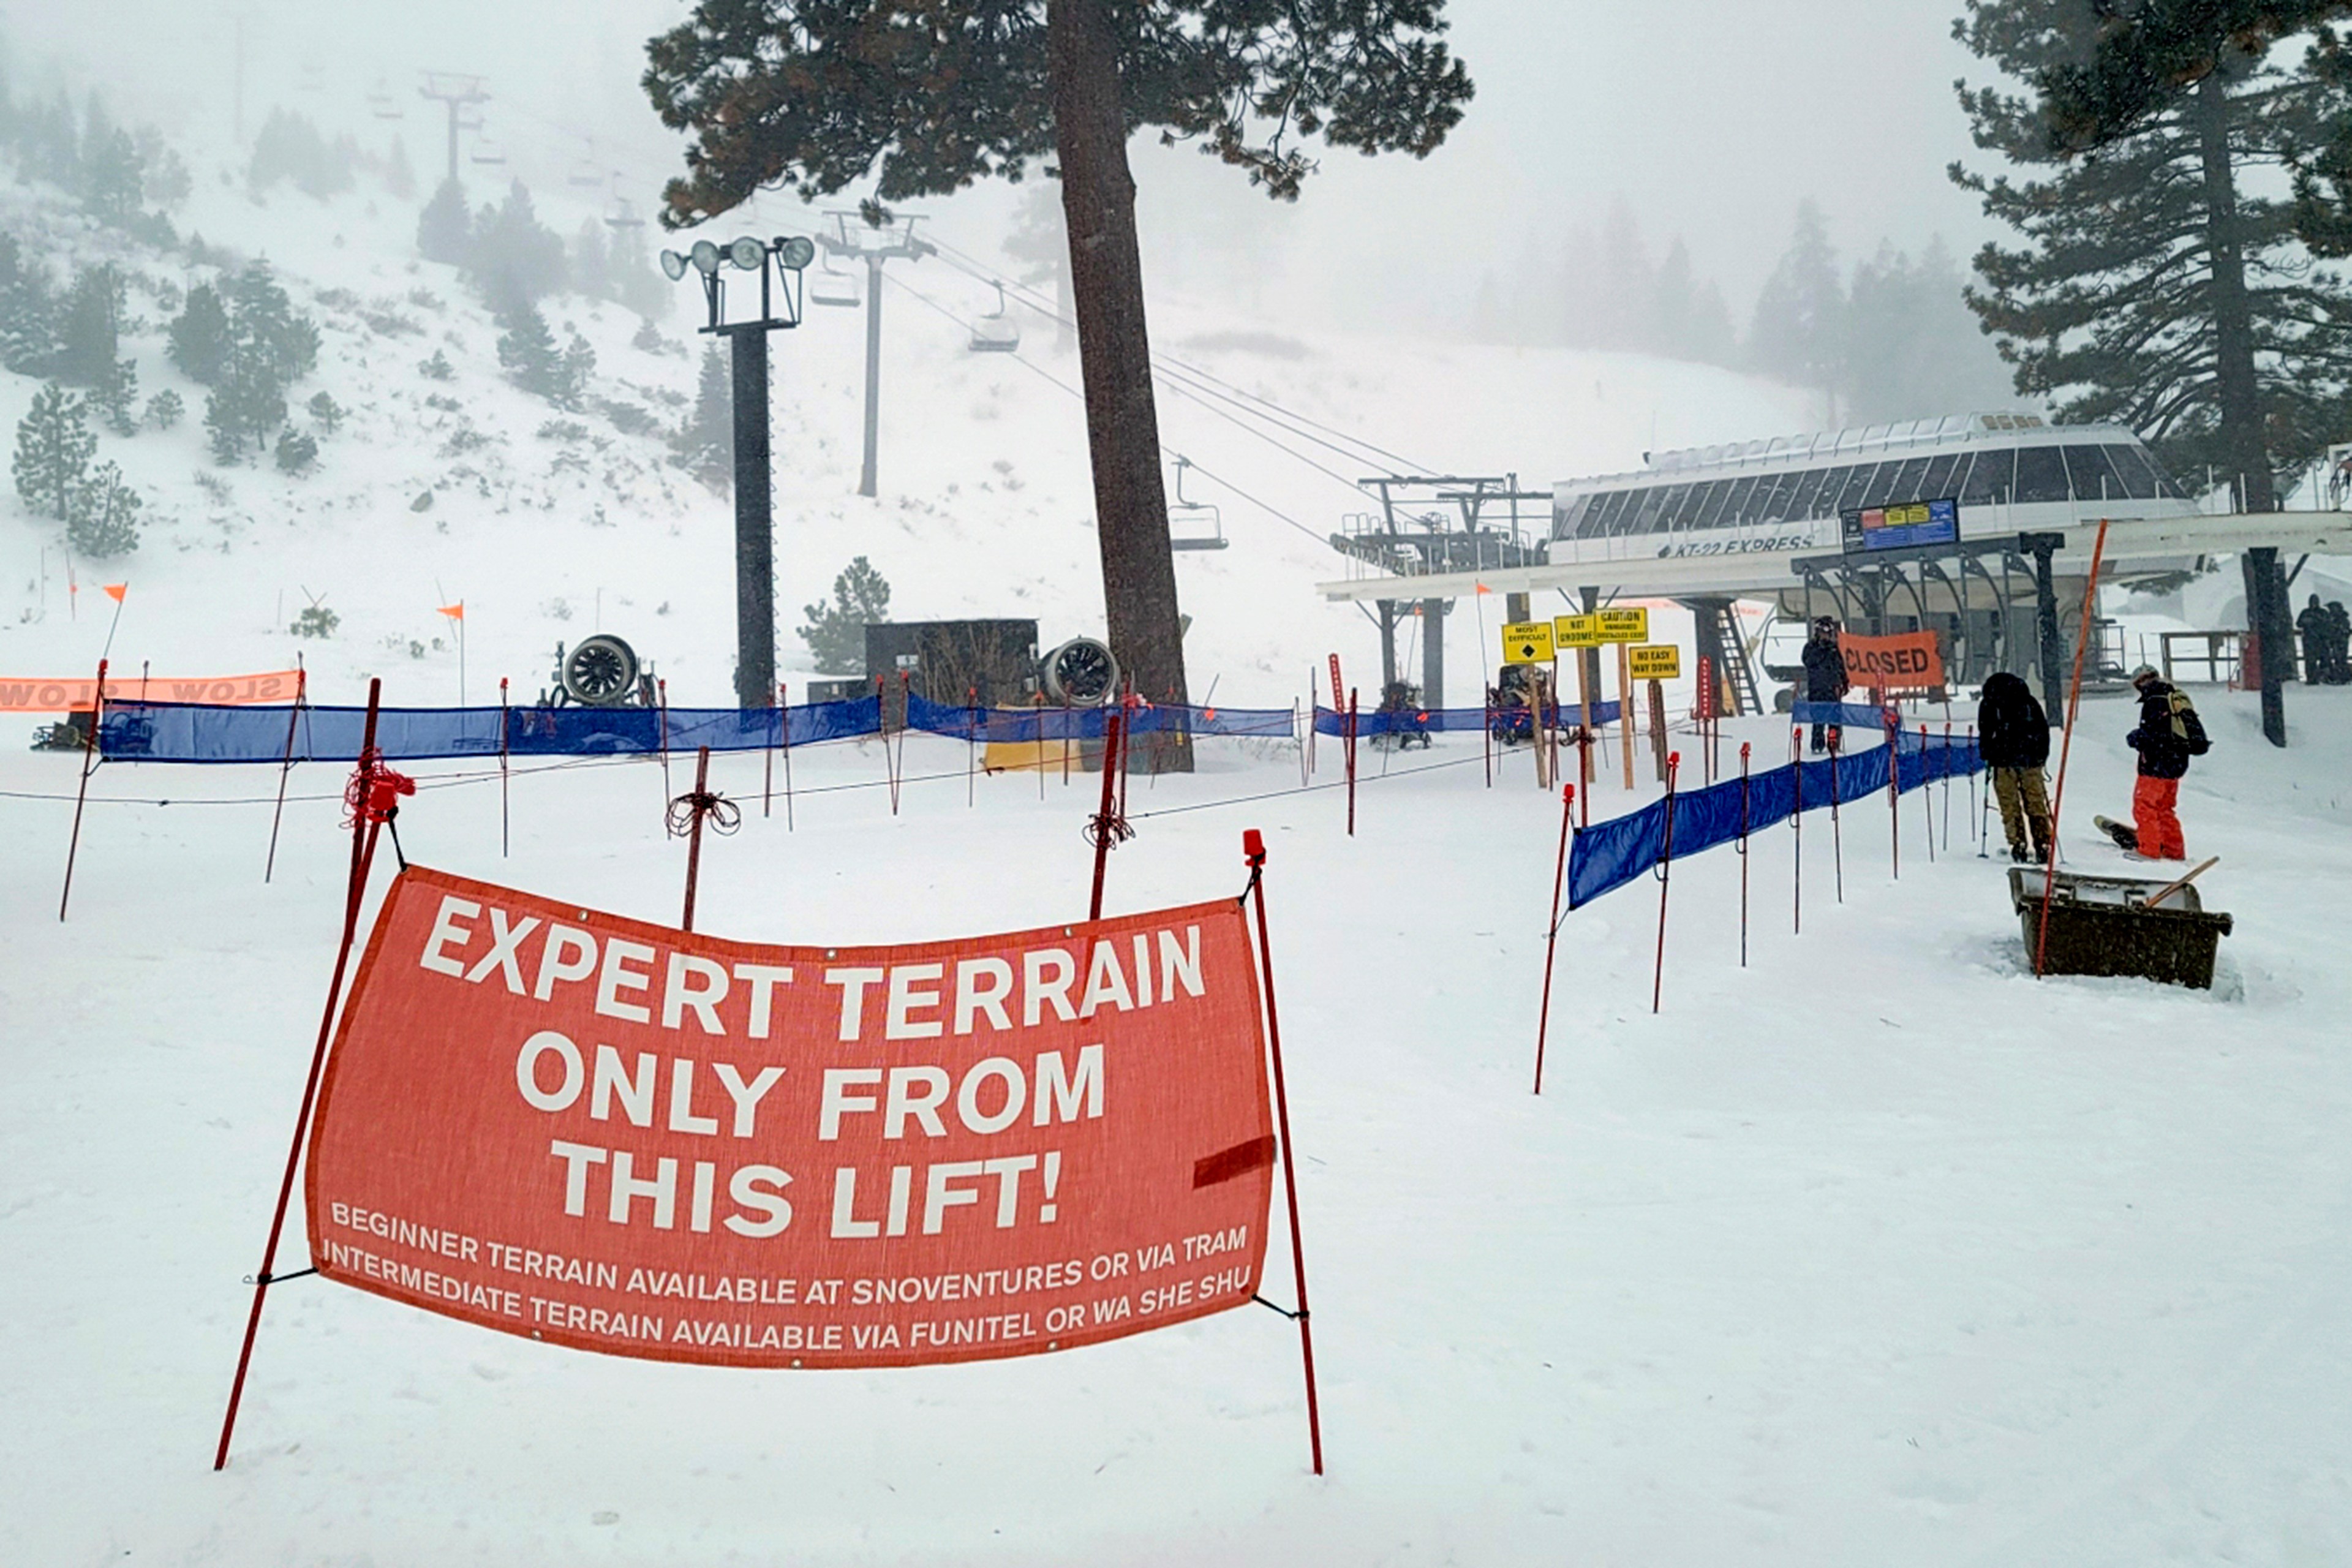 A red sign warns of expert terrain outside a ski lift